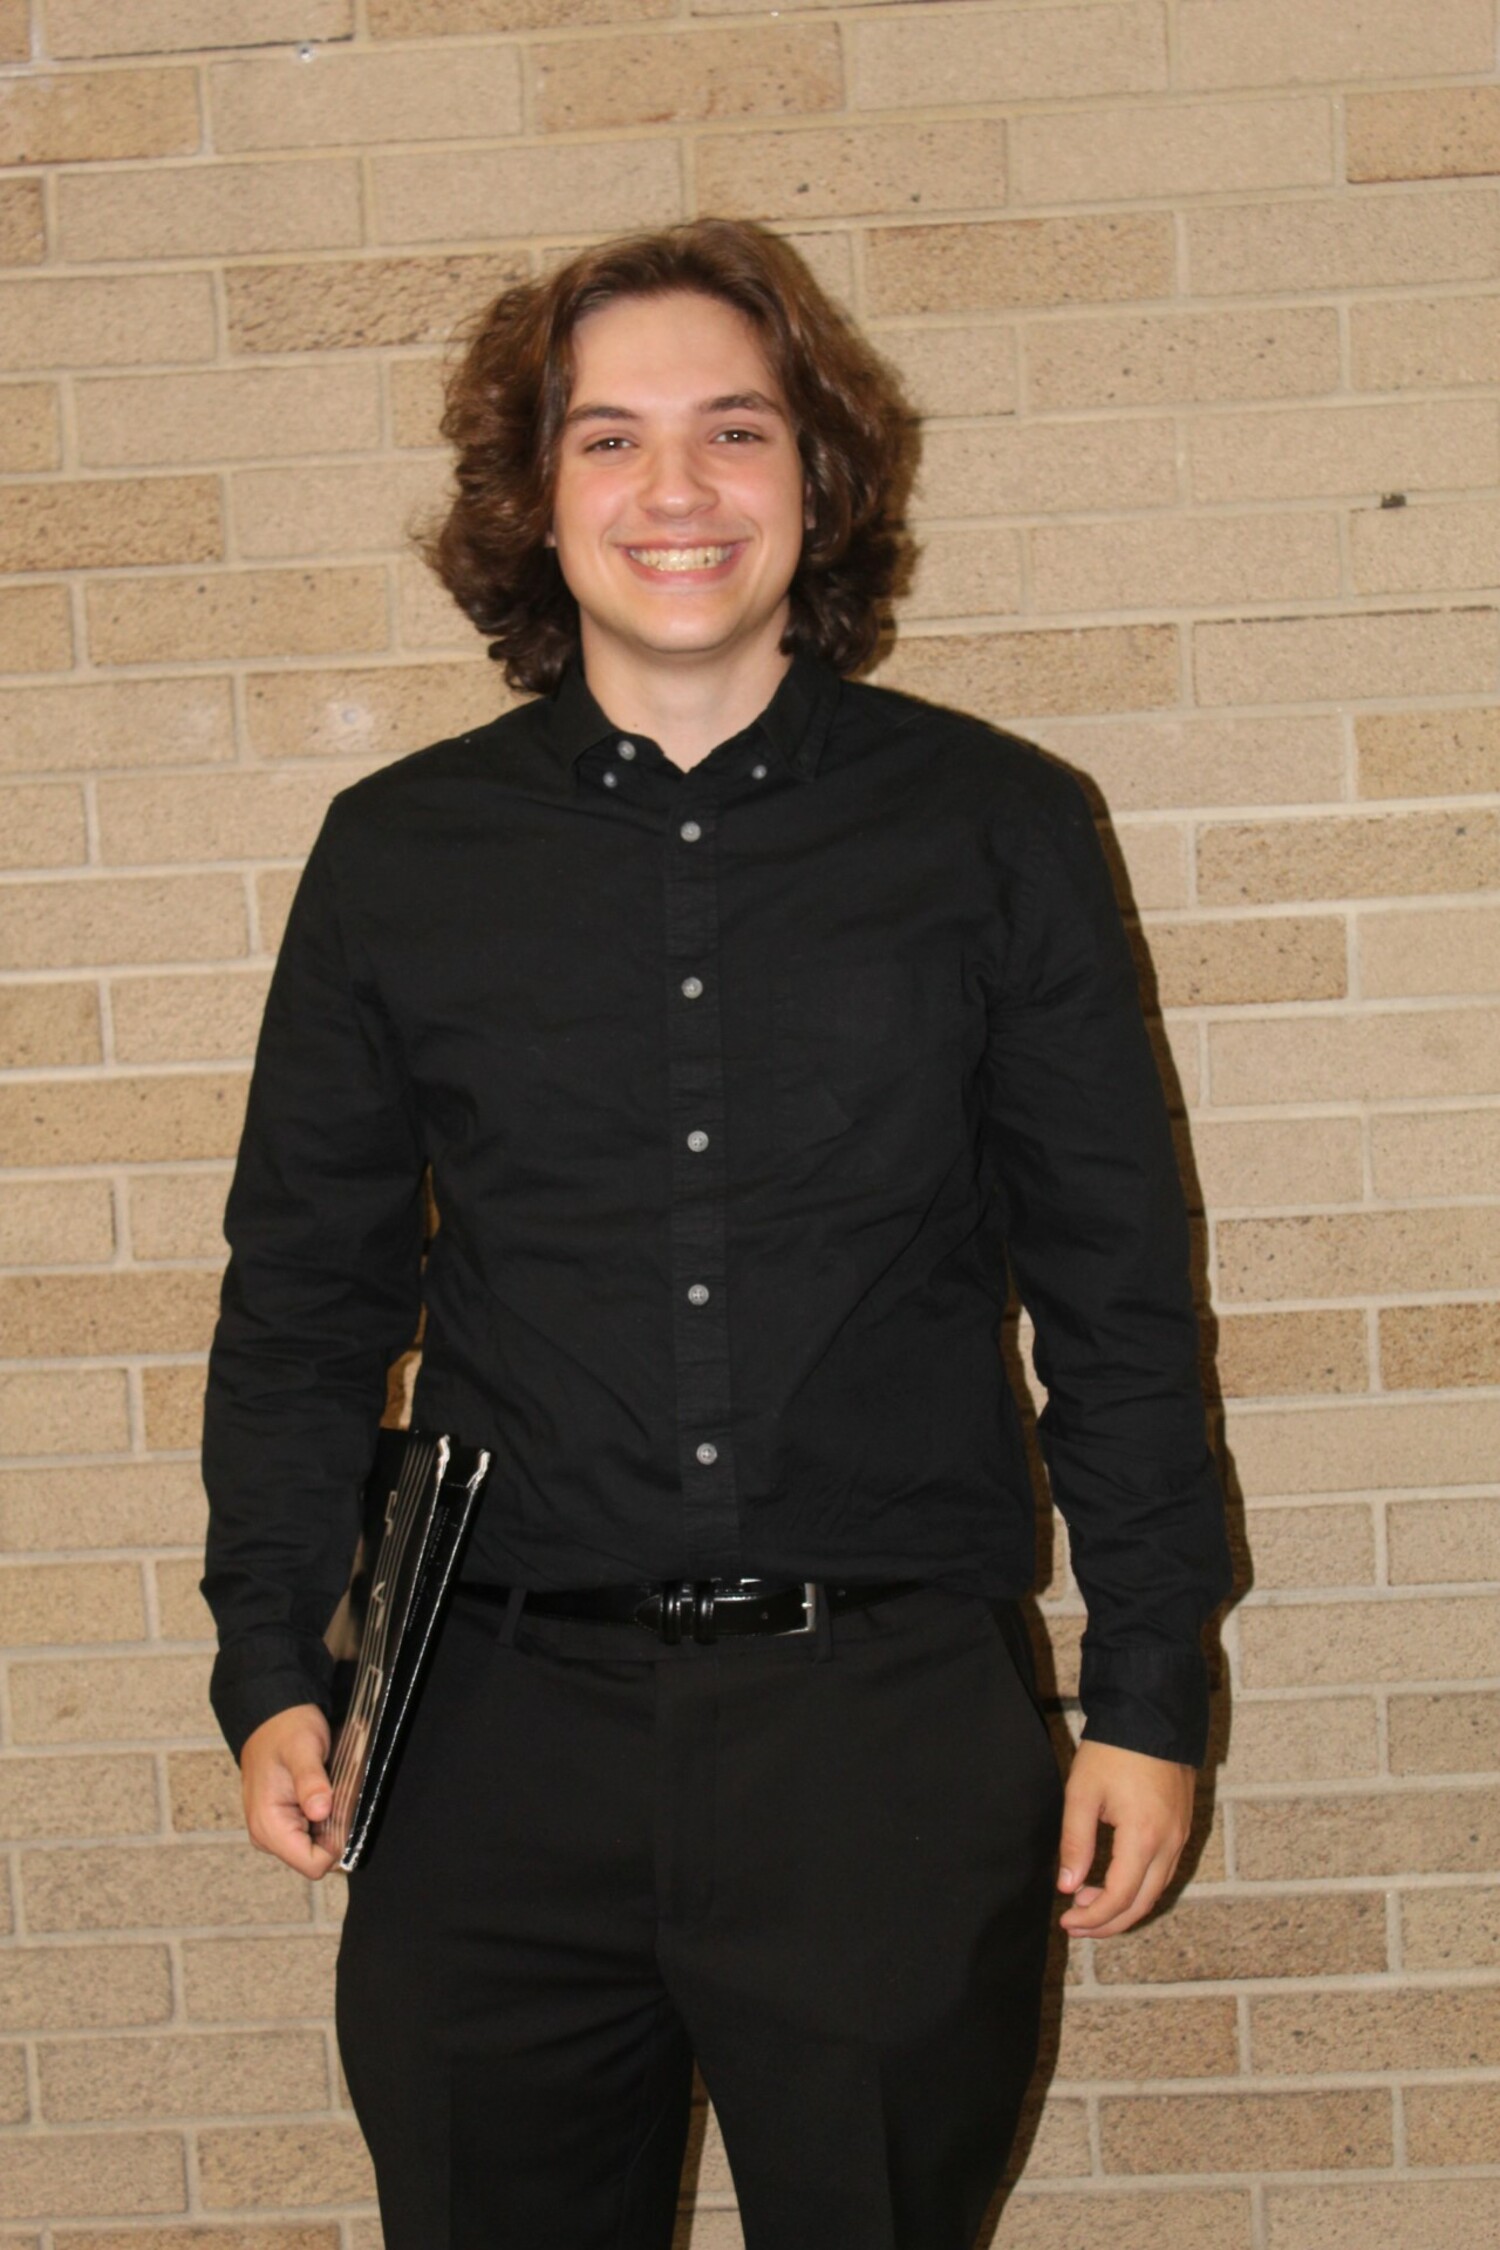 The Southampton High School senior Joseph Lucas, a tenor in the school's choir had the opportunity to sing with Suffolk County's best vocal jazz students in the All-County Vocal Jazz Ensemble on November 4.  Lucas was selected to perform based on his NYSSMA Level 6 score of 100. COURTESY SOUTHAMPTON SCHOOL DISTRICT